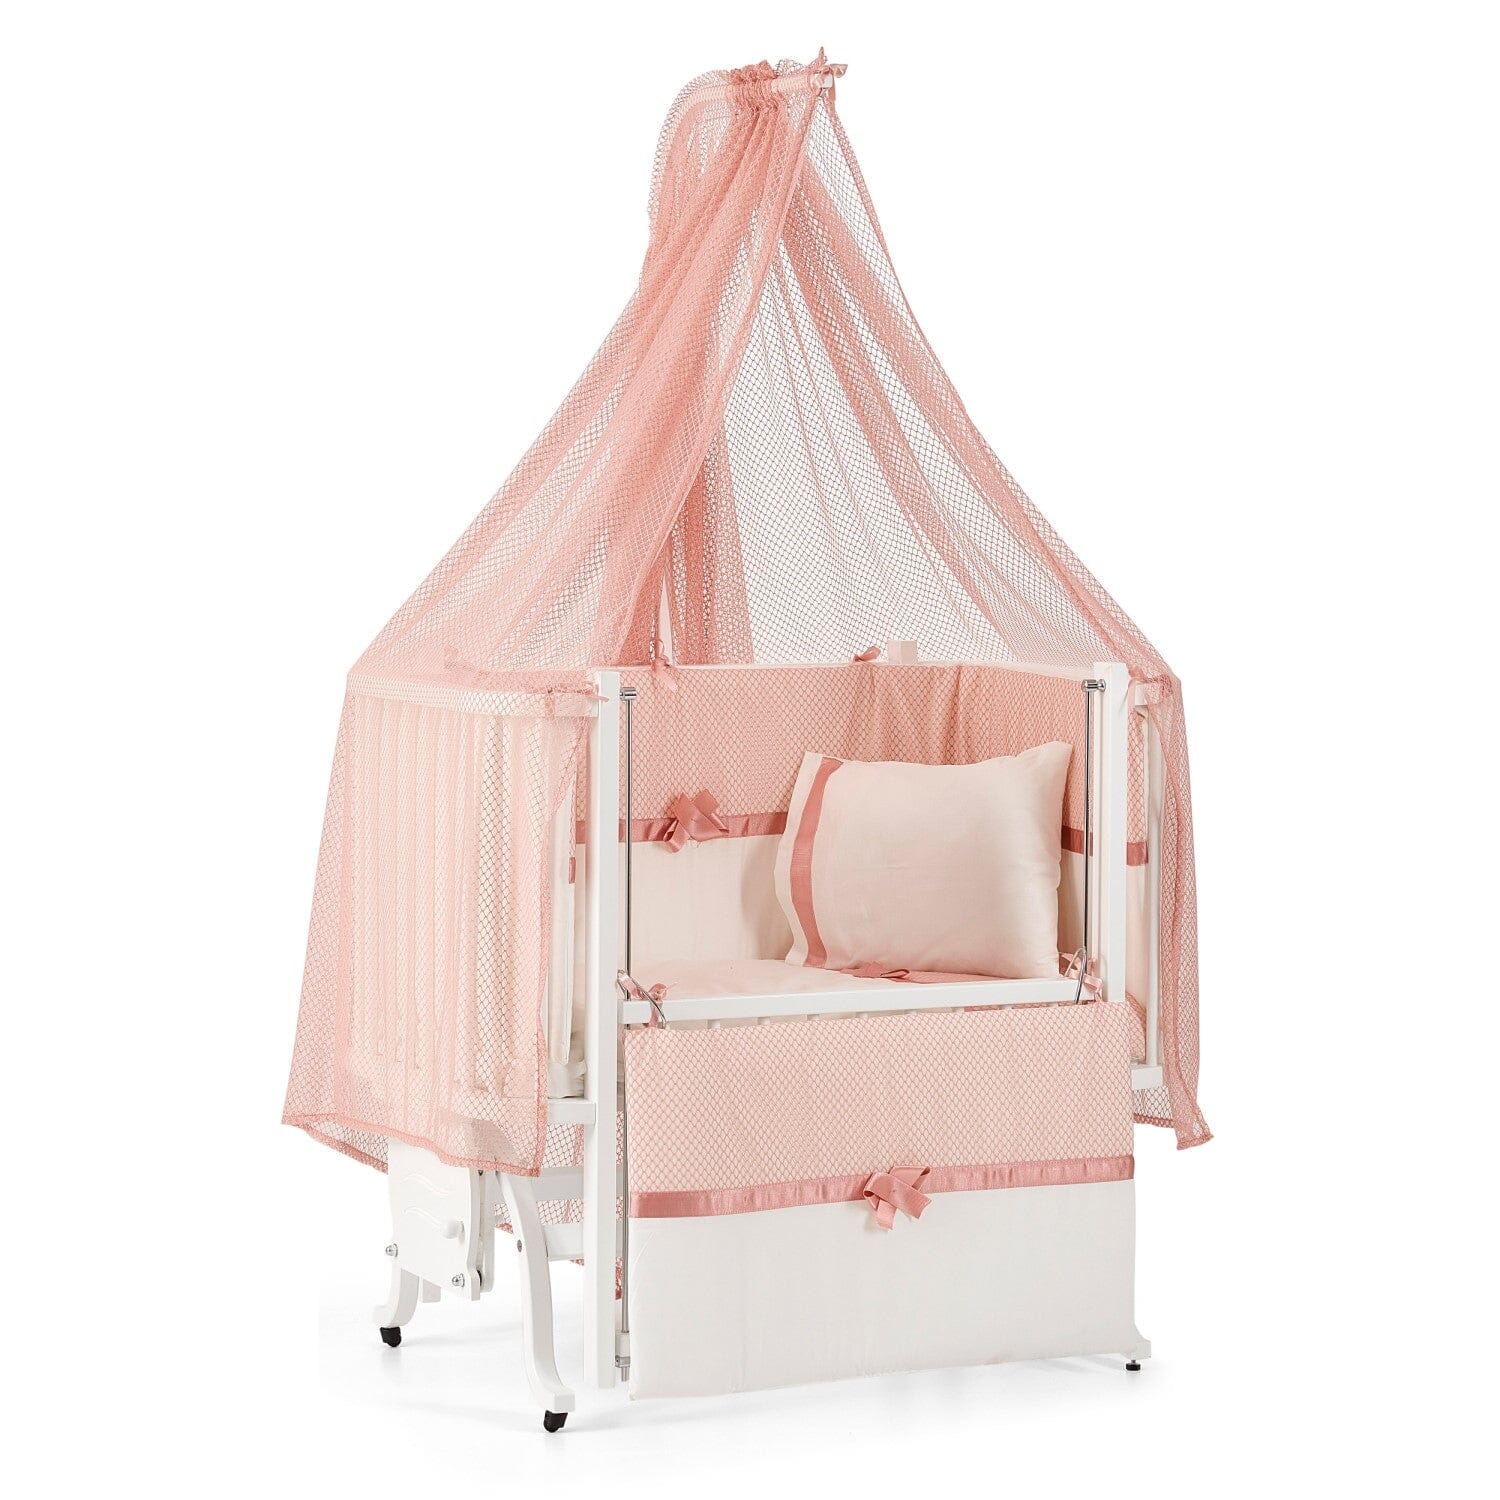 Princess Baby Girl Newborn Infant Toddler Bedroom Furniture Nursery Set, 3 levels Mum-Side Cradle Set (0-1 years old) With Wheels & Drawers Cabinet chiffonier, Drawers Chest (0-12 years old), Beech Wood Kids Girl Baby Room Chiffoner Bedroom Nursery Set General Meltem Smart 